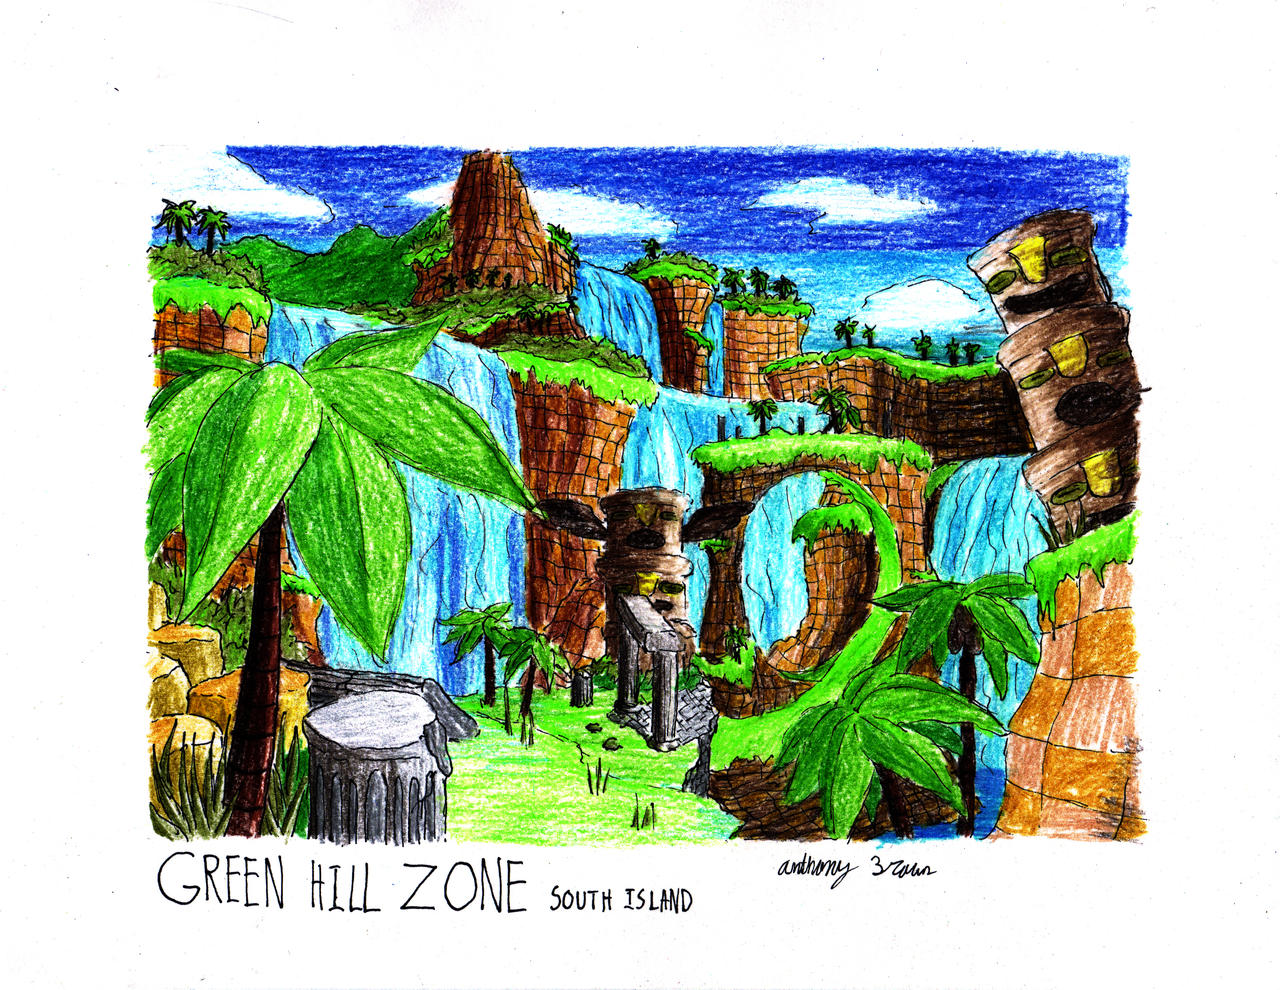 Green Hill.Exe by Camunon on DeviantArt